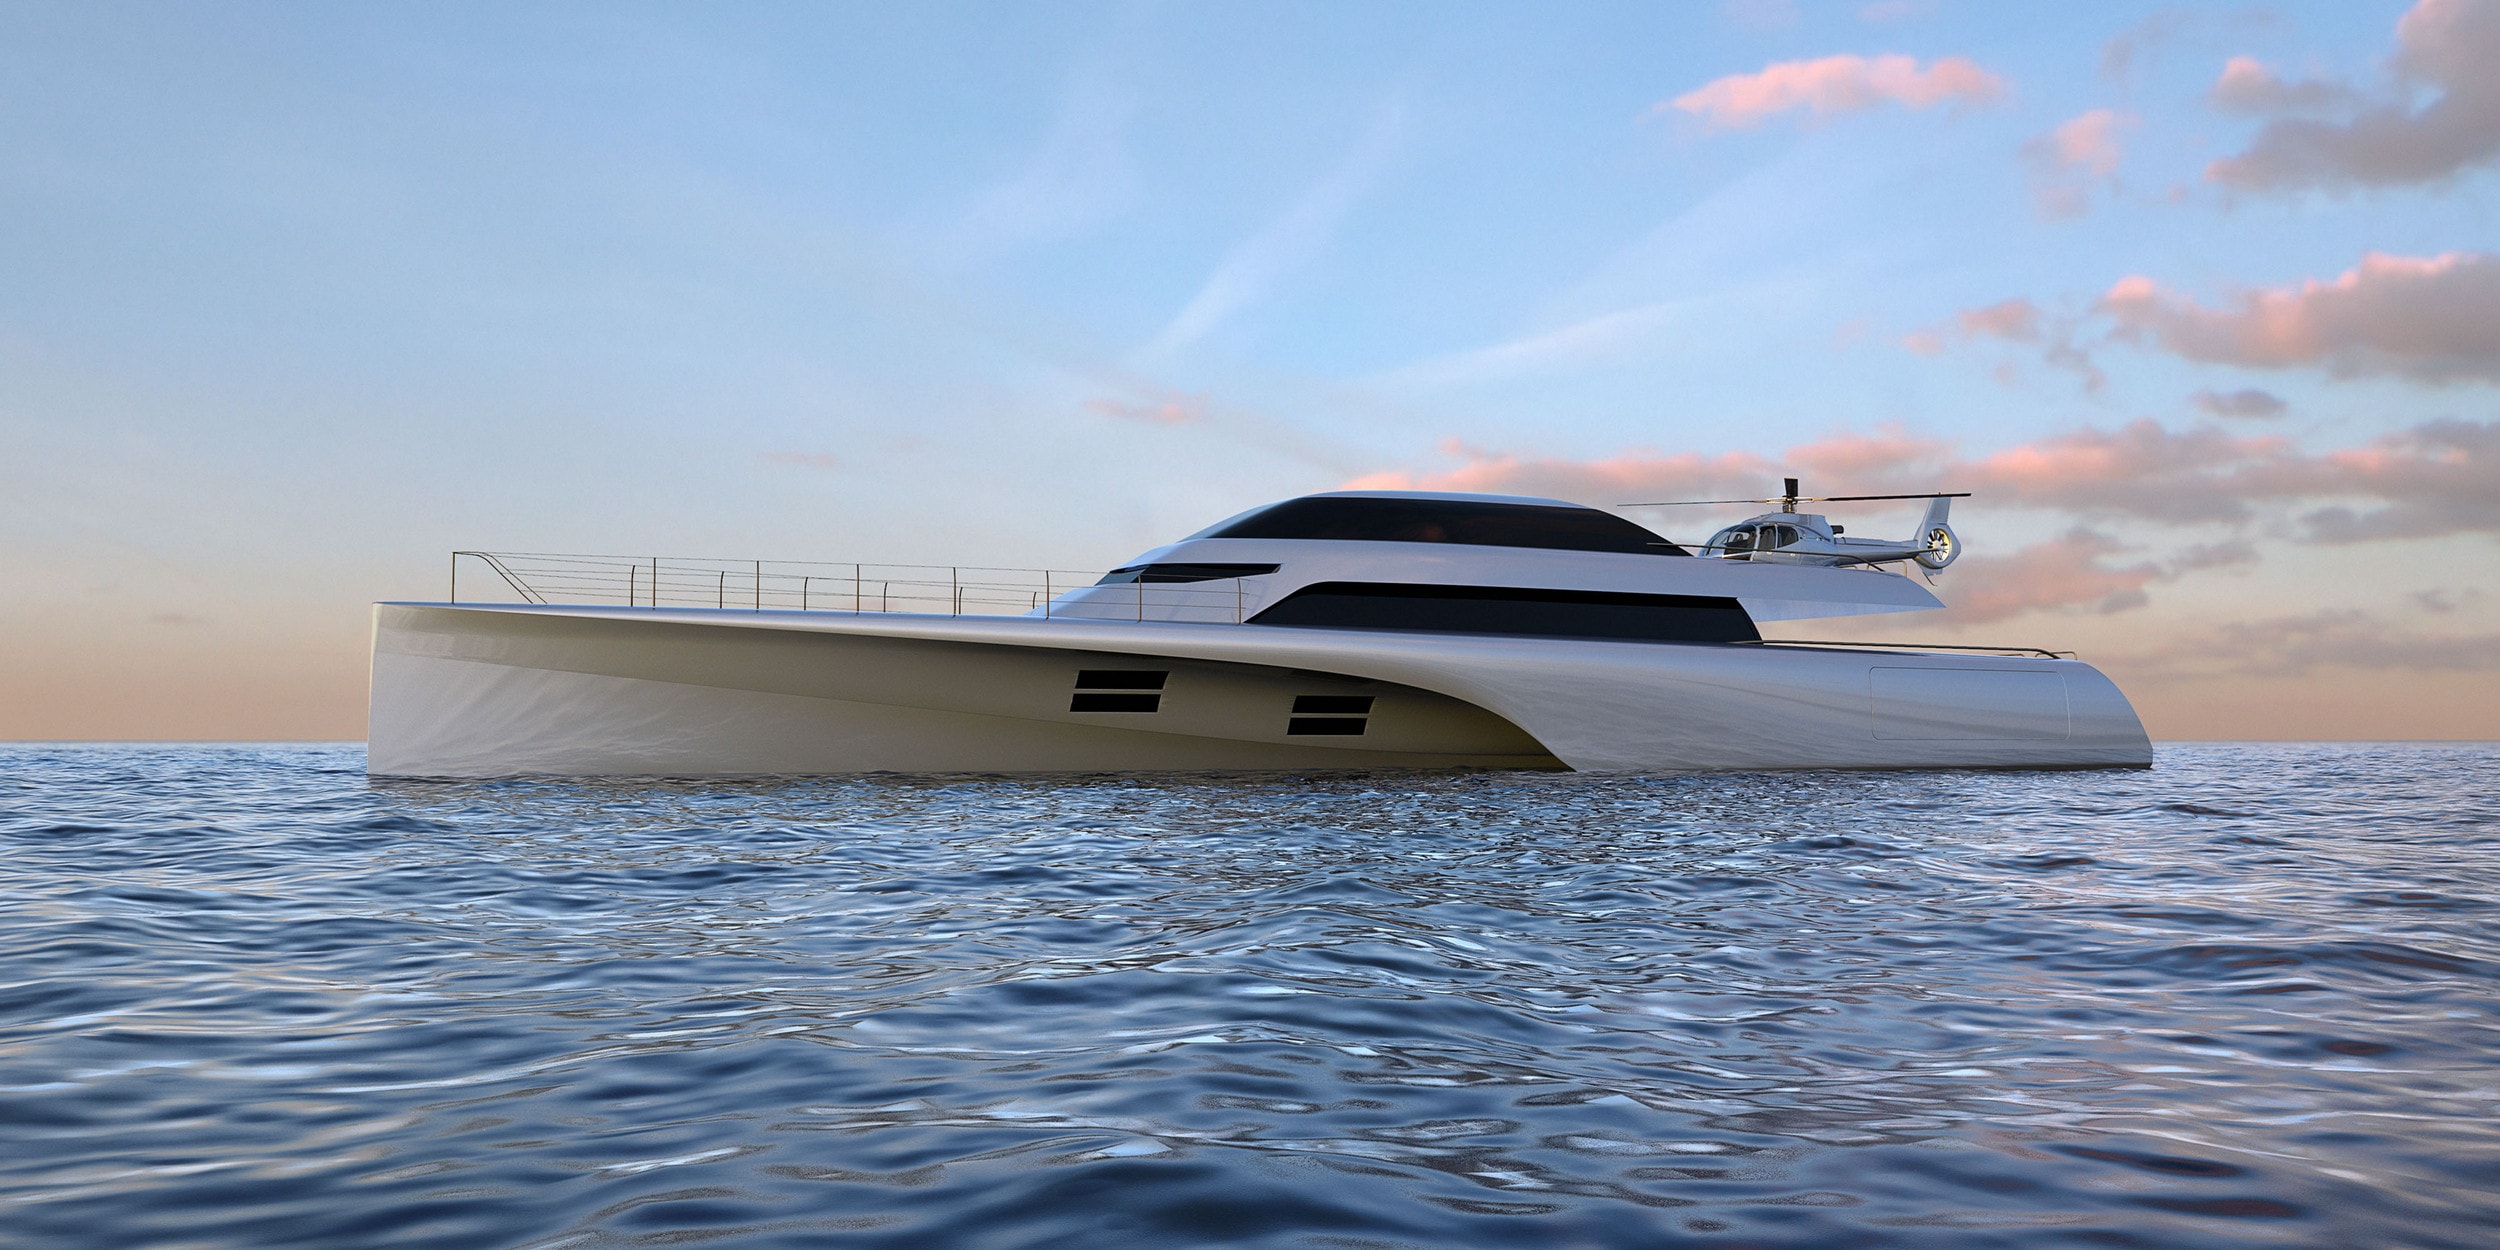 Frers’ 153-Foot Catamaran Is a .5 Million Luxury Toybox Meant for Trans-Oceanic Travel